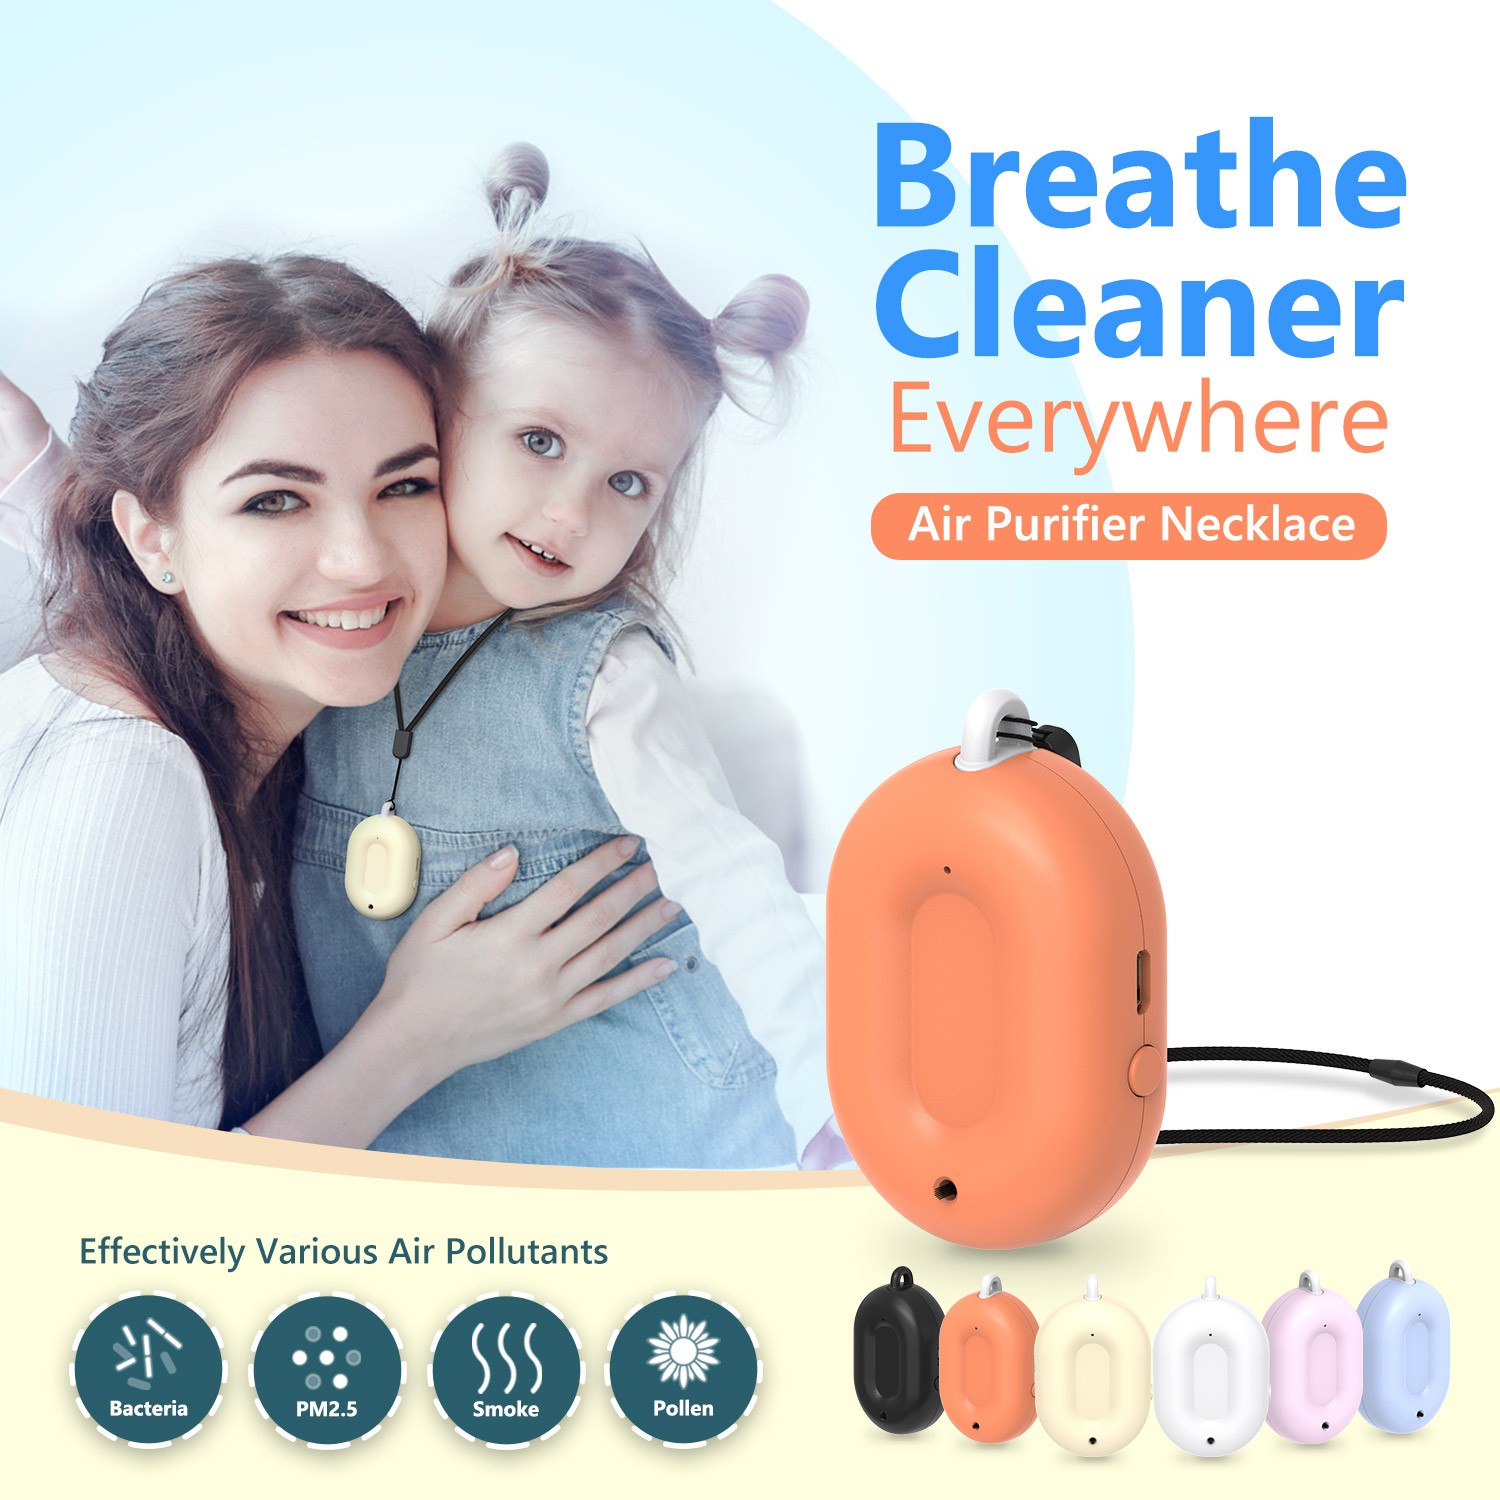 IONKINI Personal Portable Wearable Air Purifier Necklace JO-2005